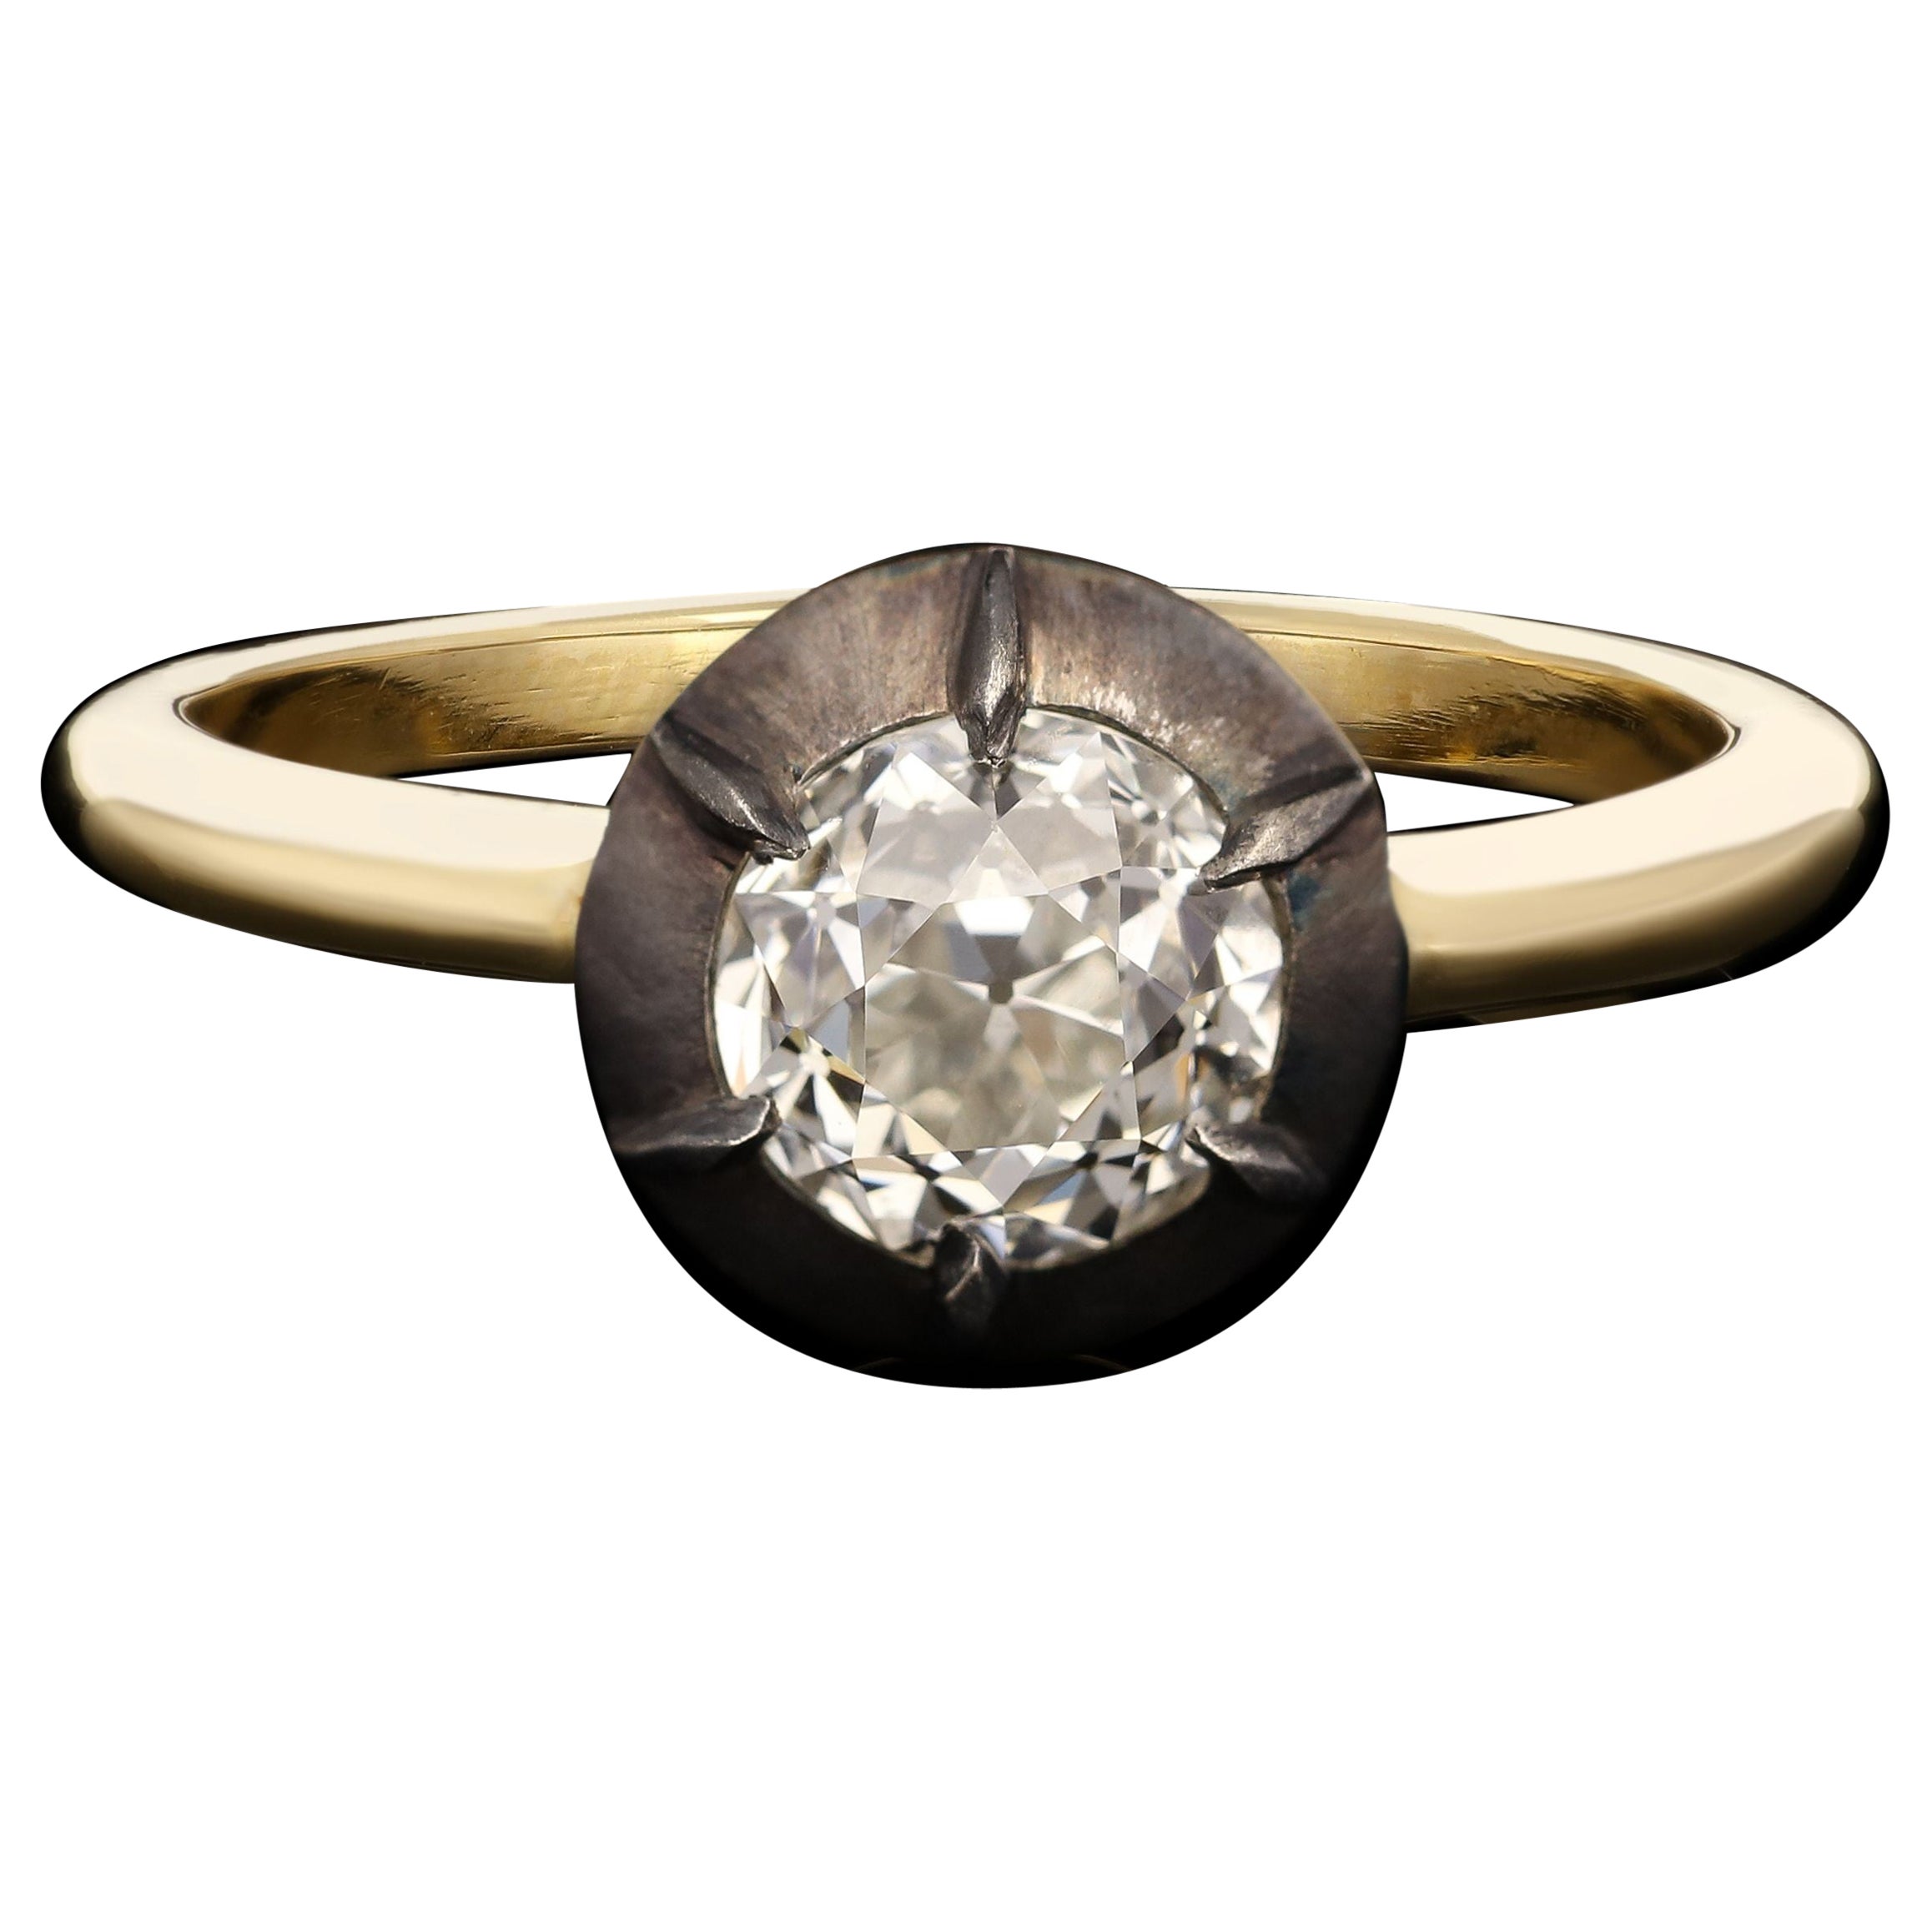 Hancocks 1.01ct Old European Brilliant Cut Diamond Ring in Antique Style Setting For Sale